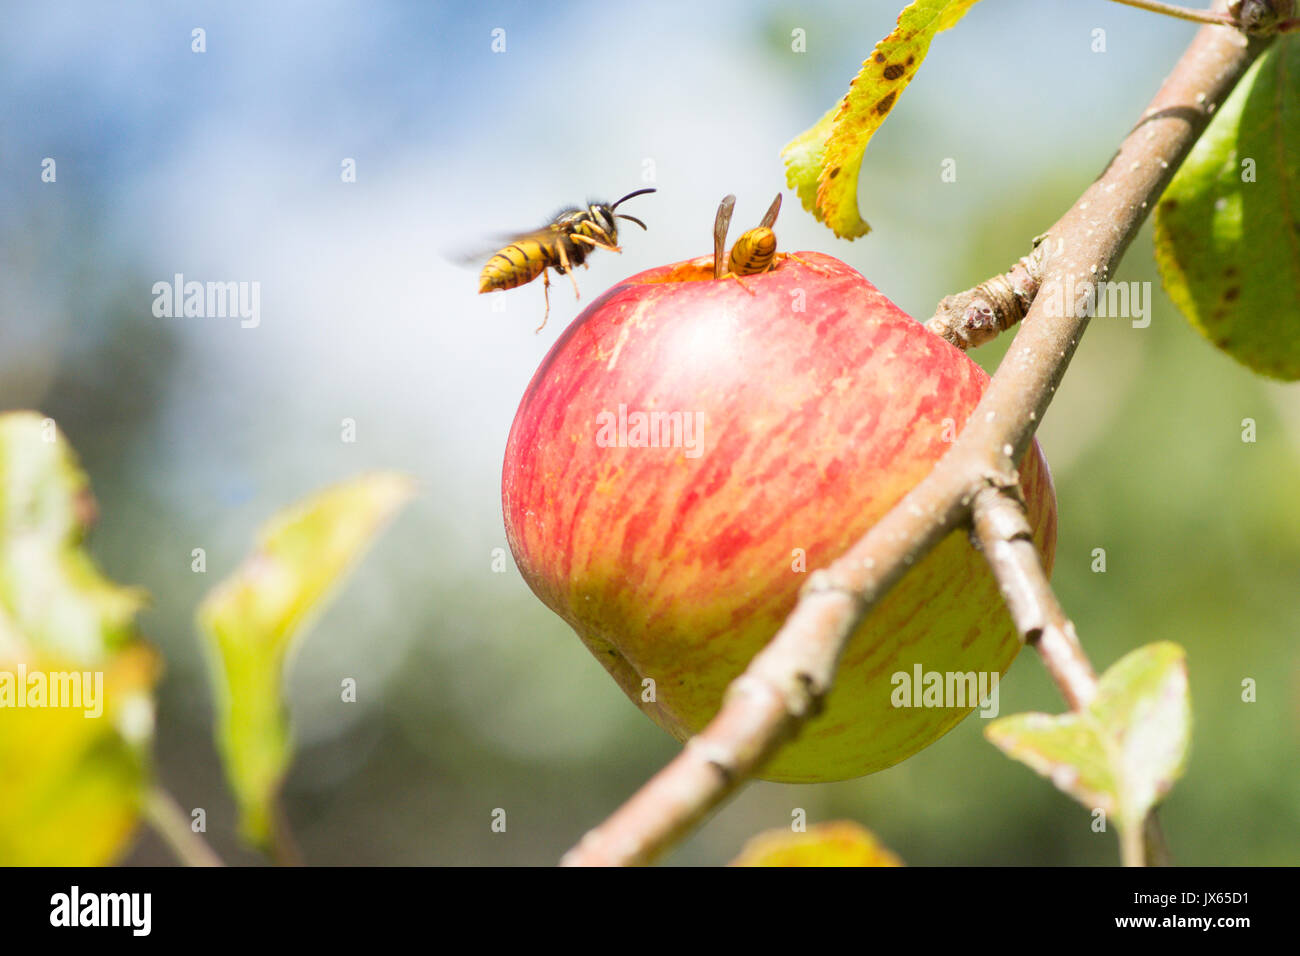 Two Common wasps, Vespula vulgaris, one flying, eating hole in eating apple, Sussex, UK. August Stock Photo